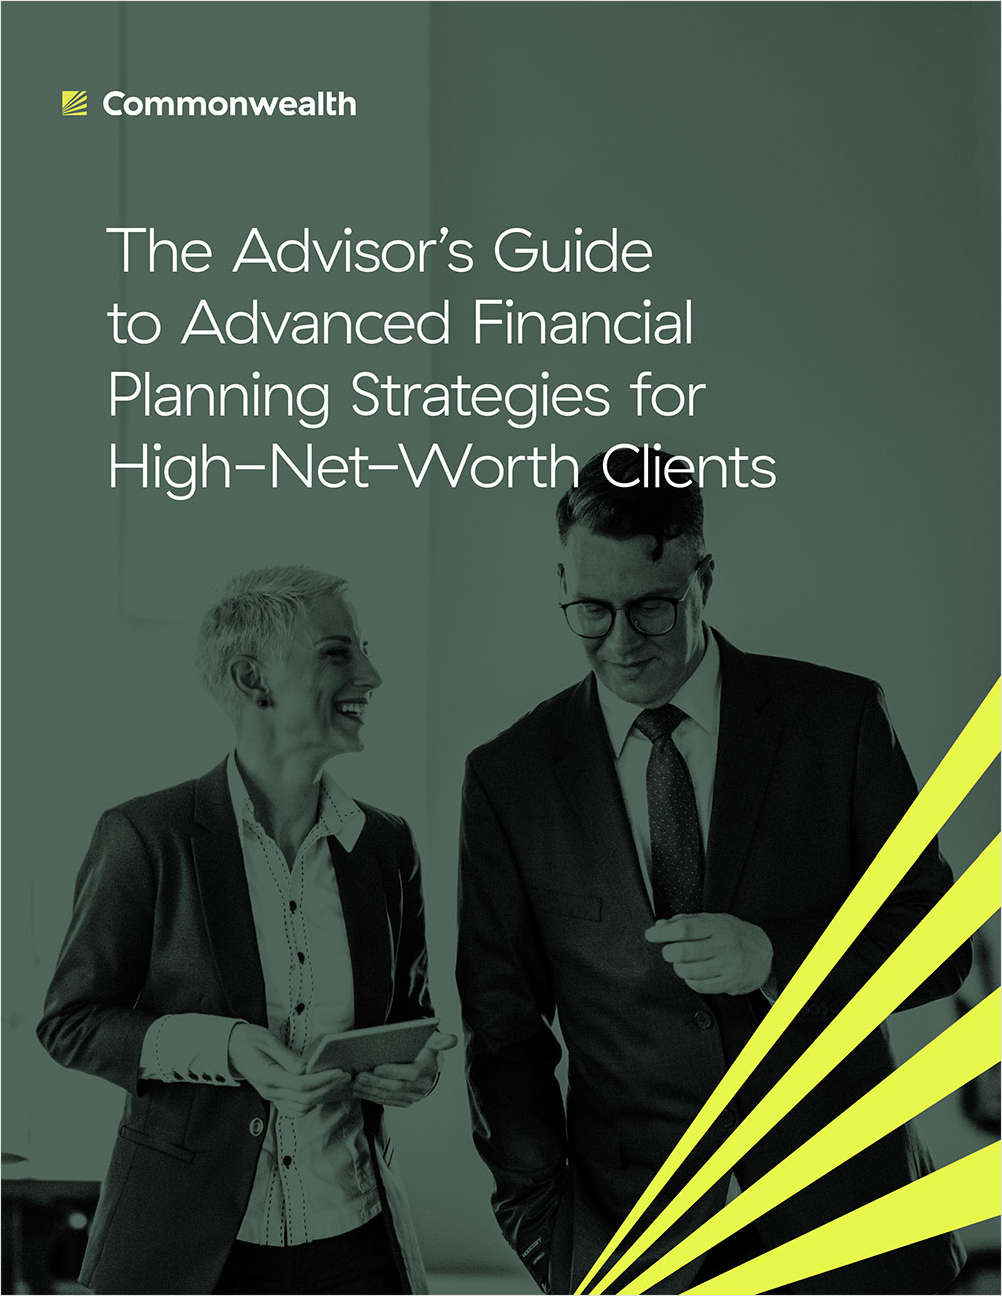 The Advisor's Guide to Advanced Financial Planning Strategies for High-Net-Worth Clients